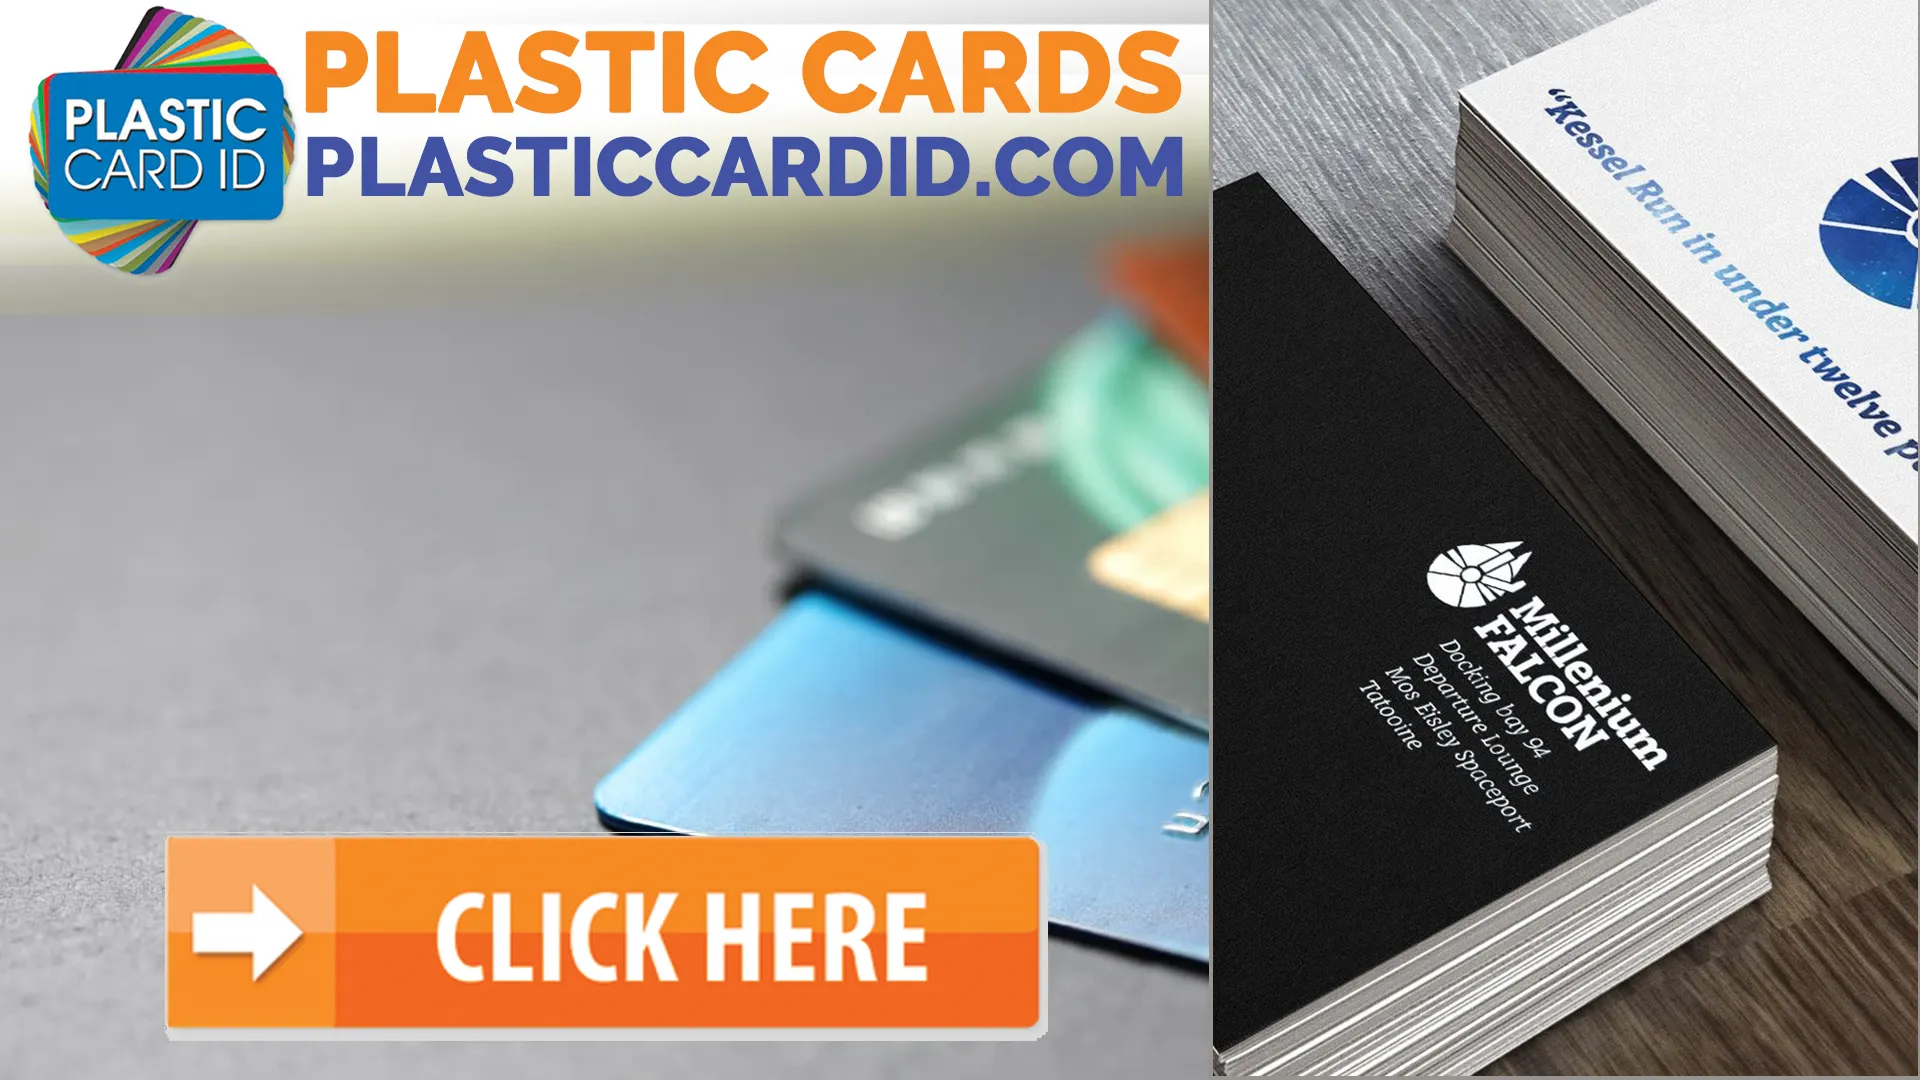 Making the Most Out of Your Plastic Cards